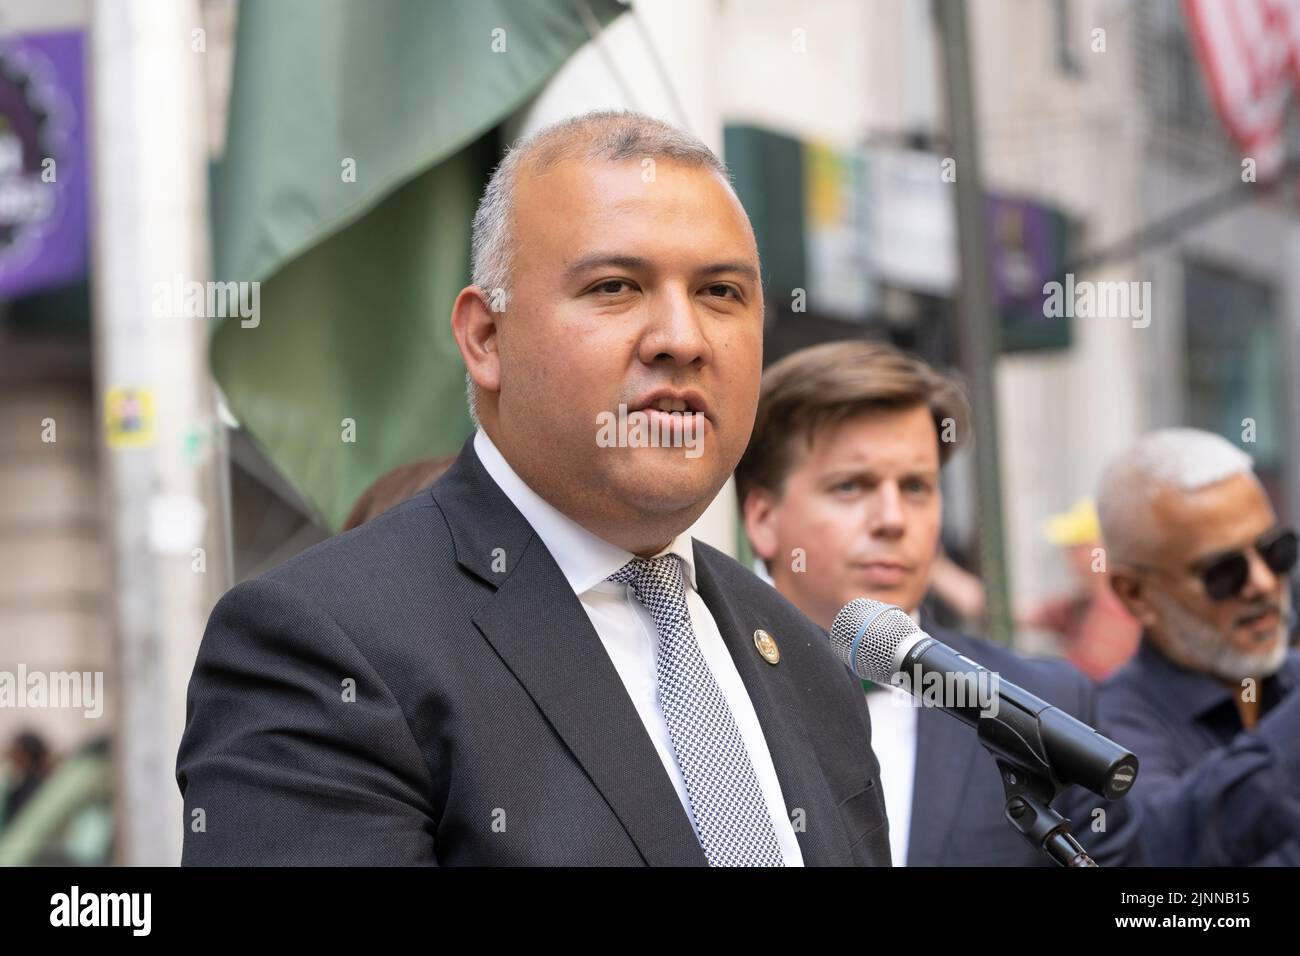 New York, NY - August 12. 2022: Commissioner of Immigrant Affairs Manuel Castro speaks during ceremony of Pakistani flag raising at Bowling Green Park Stock Photo